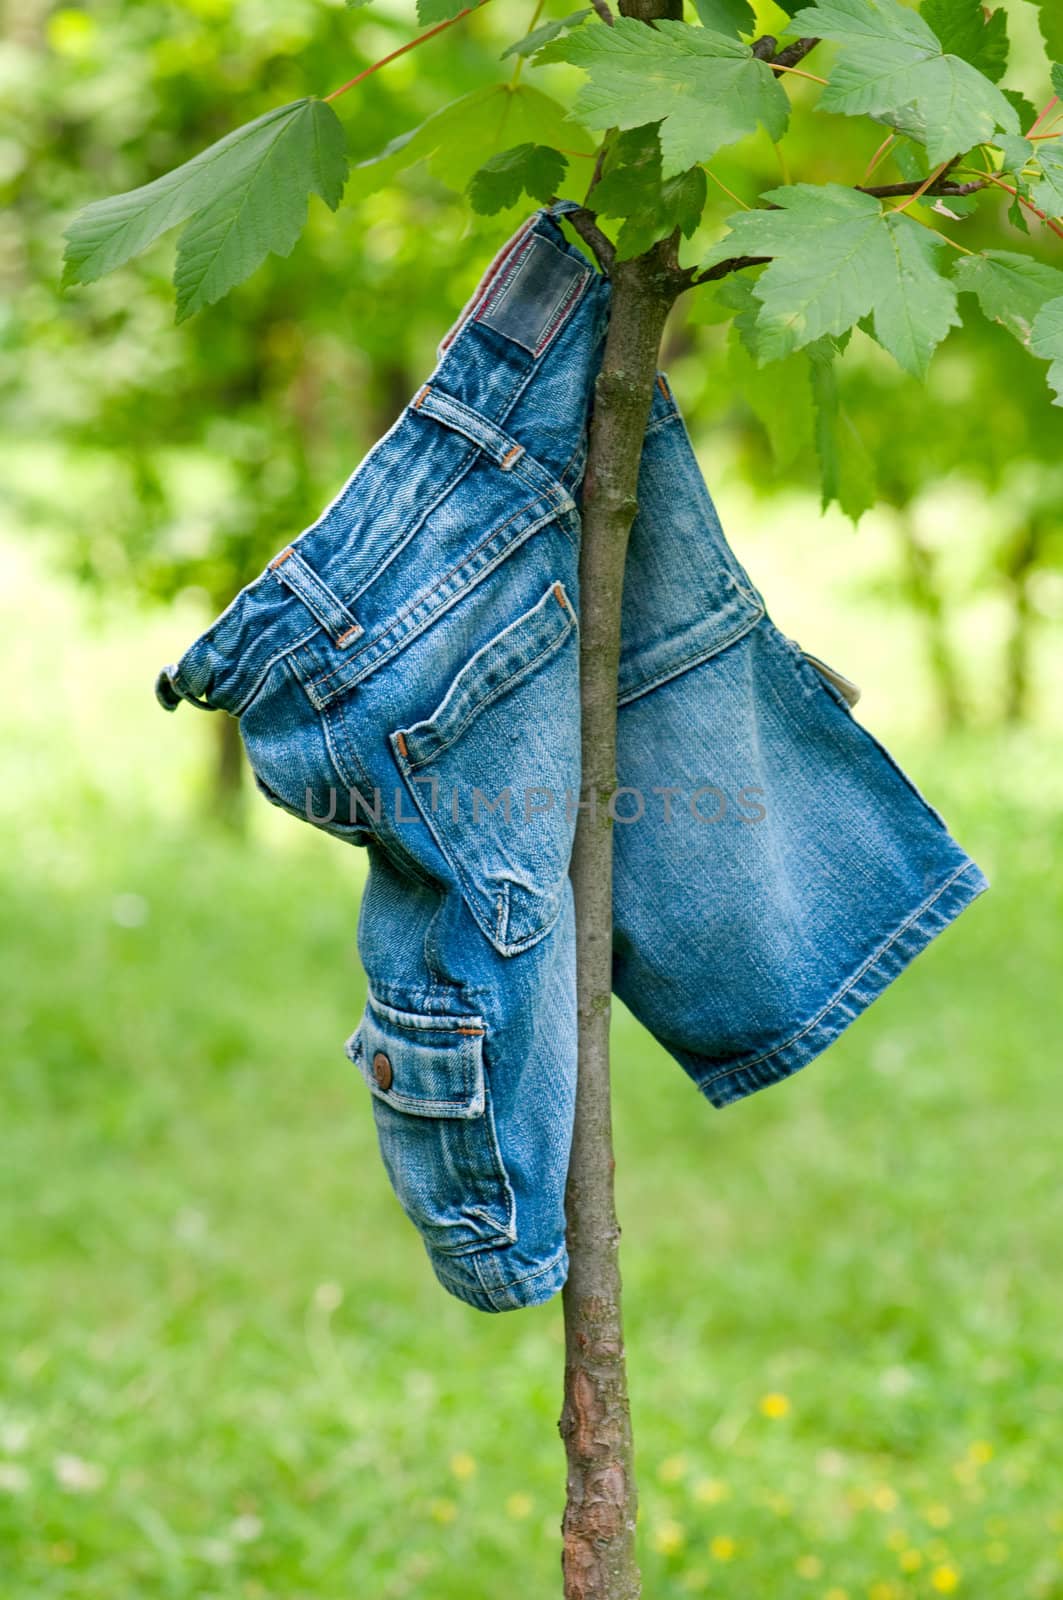 blue jeans hanging on a tree by DNKSTUDIO